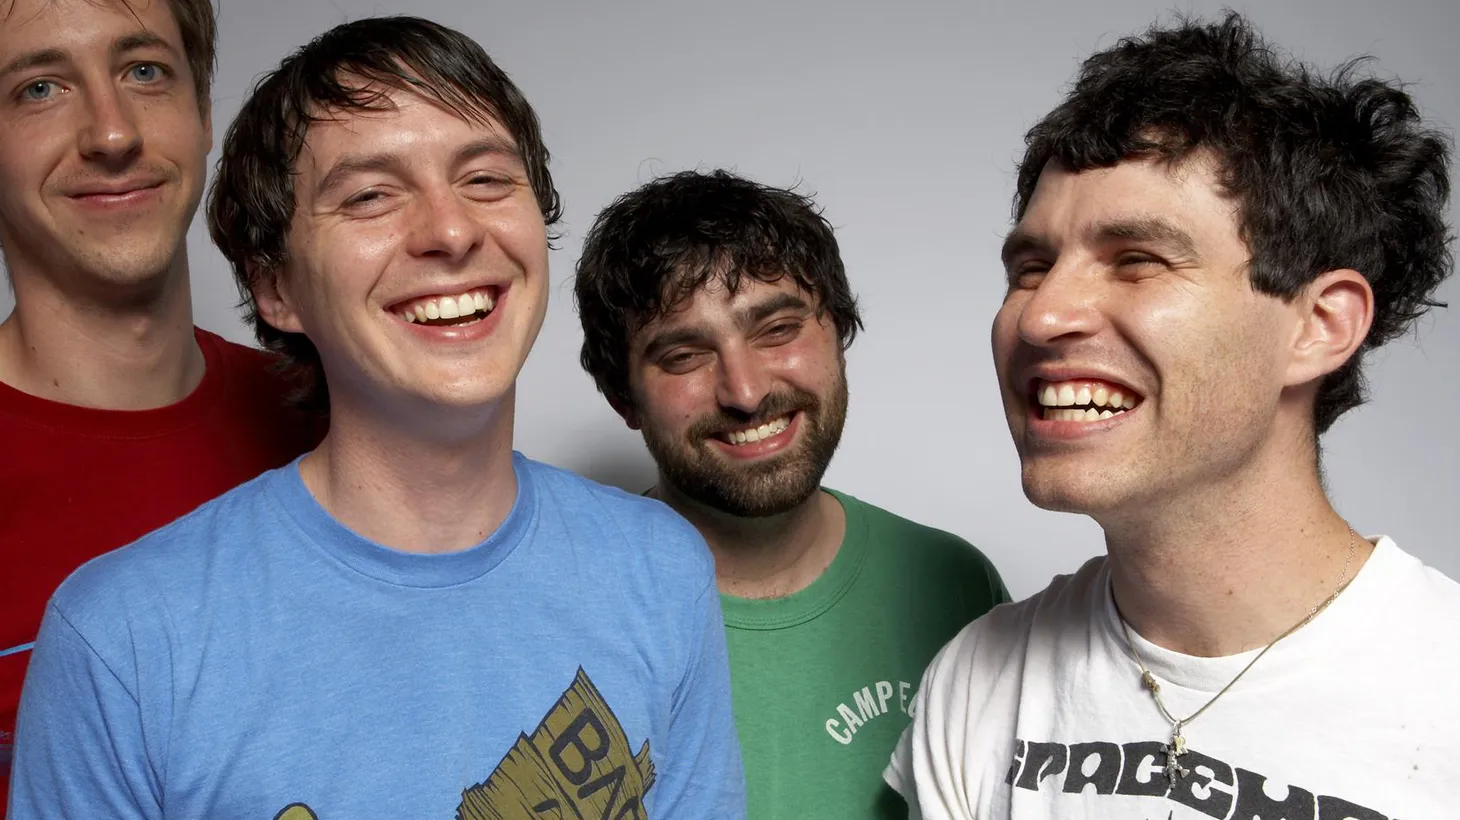 Baltimore's Animal Collective has always been considered an experimental band but they stretch even their own boundaries with their new release.